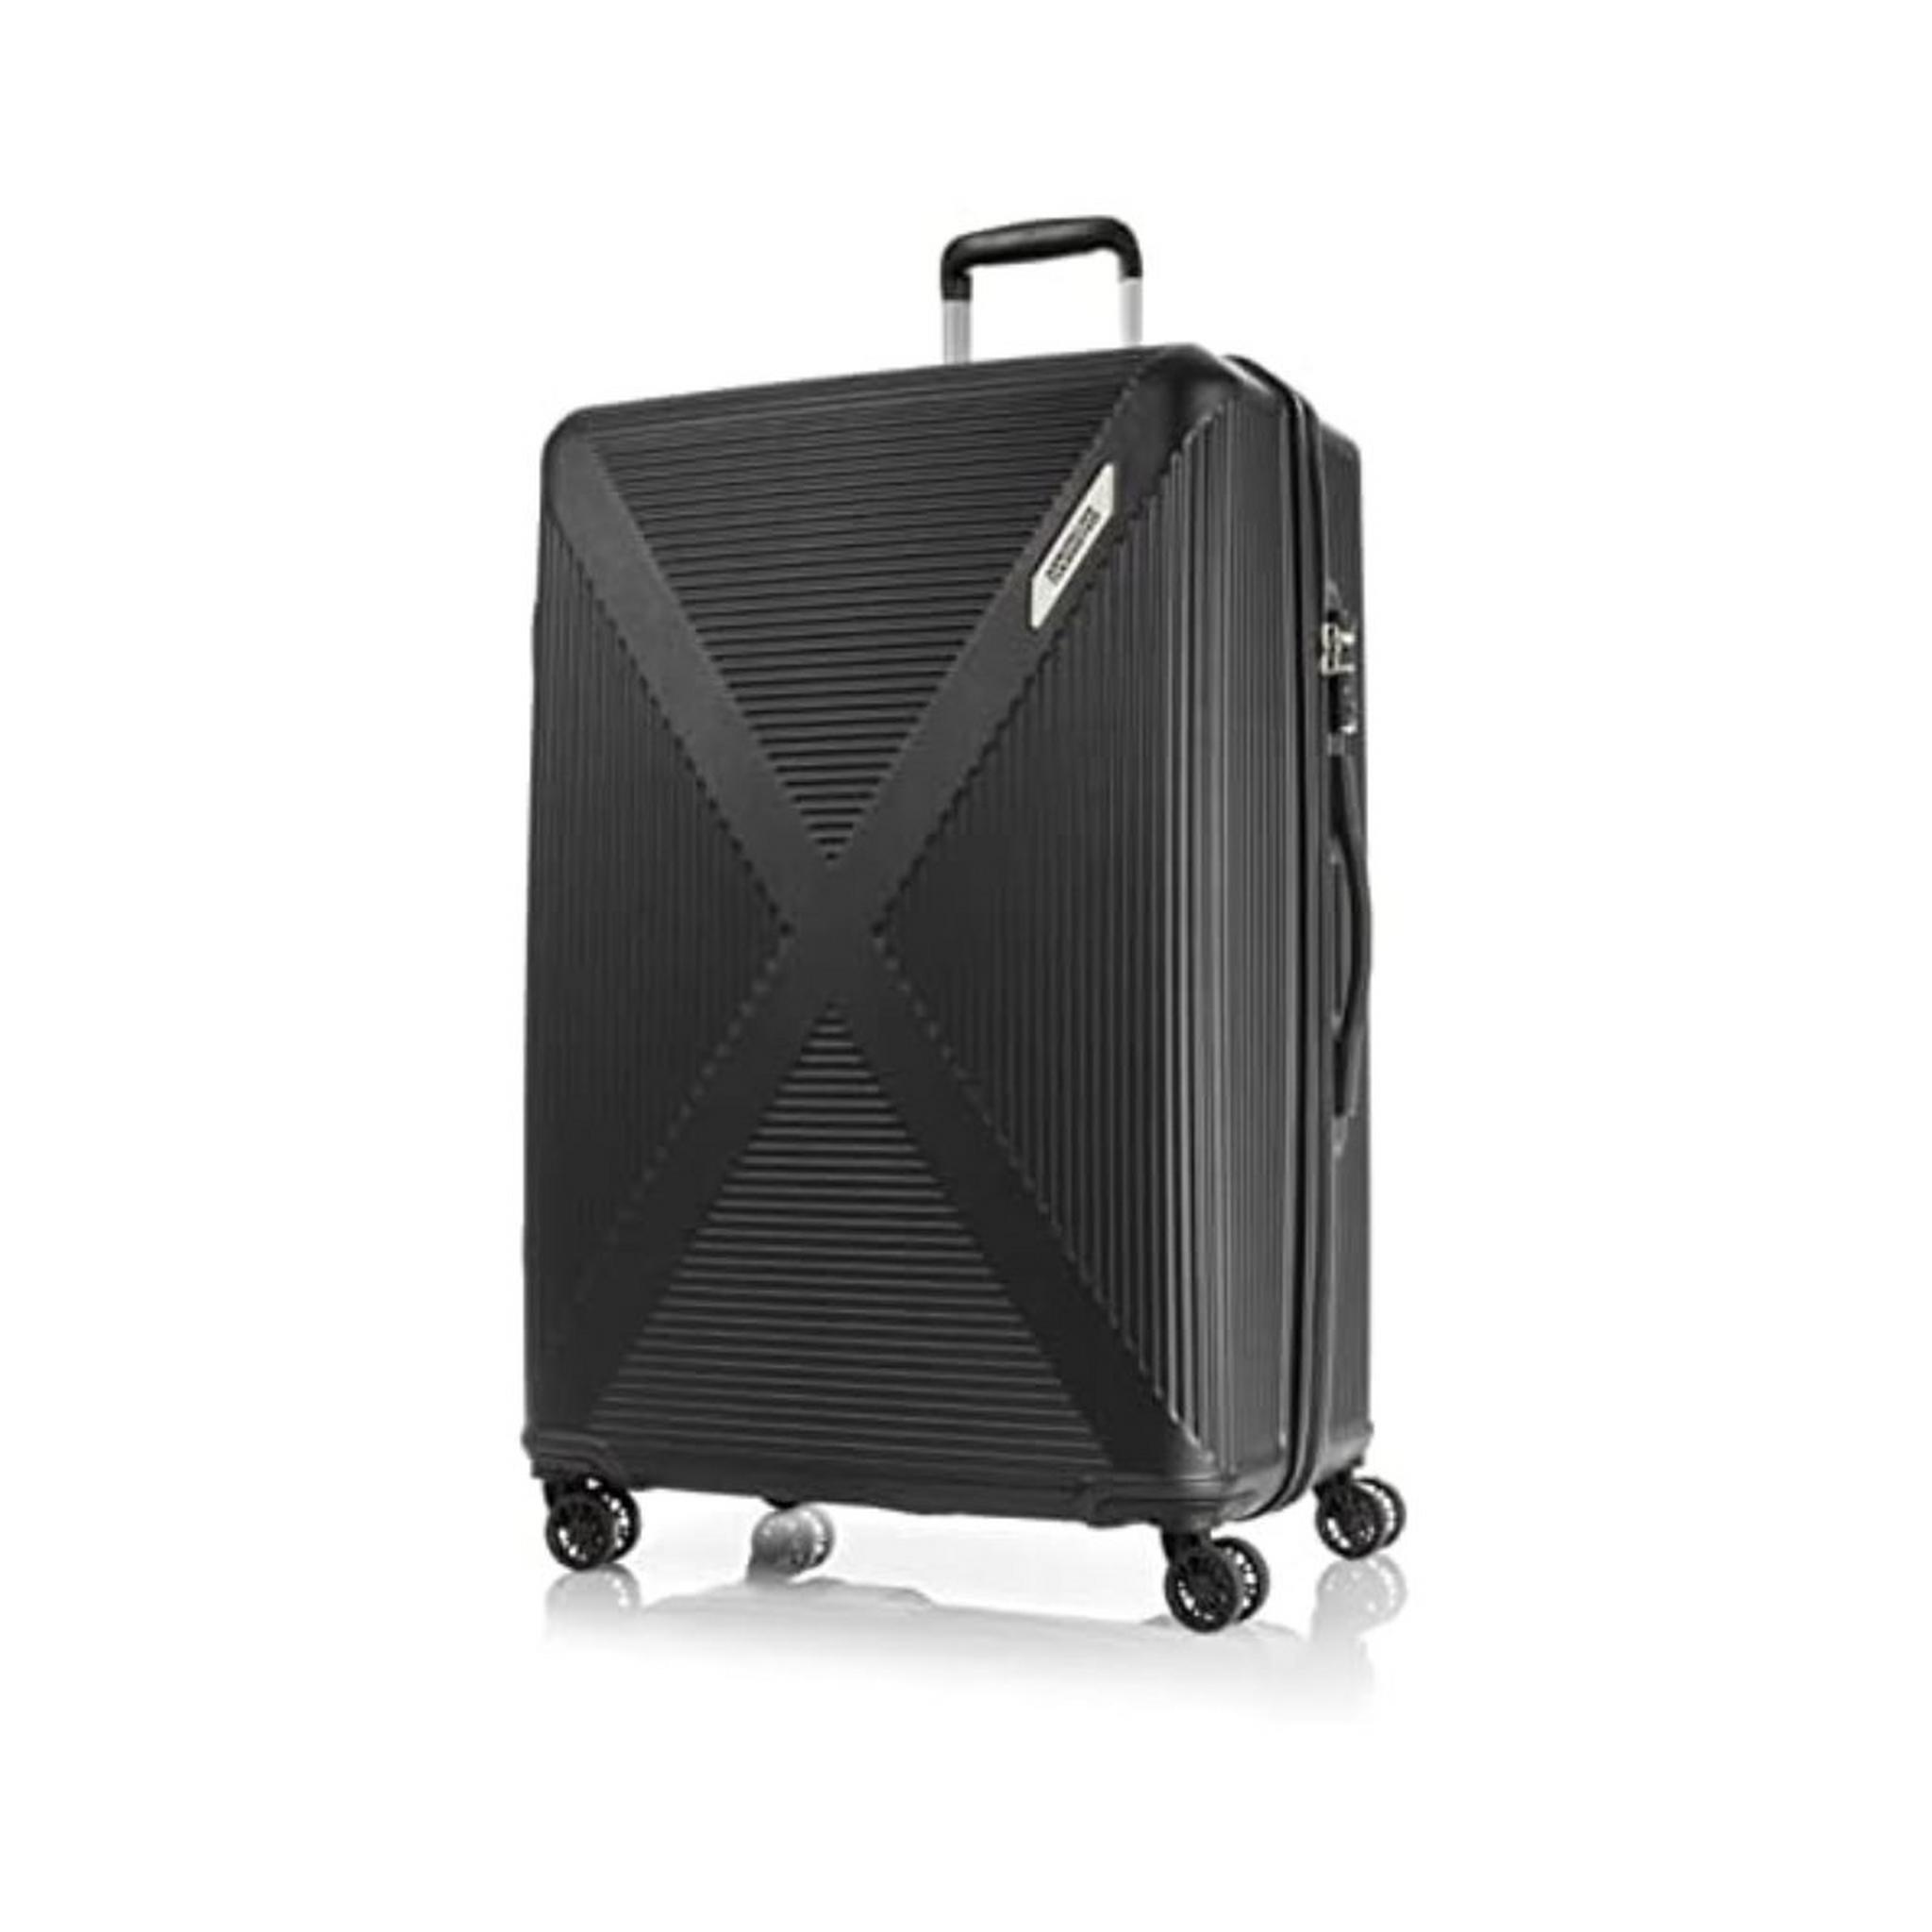 AMERICAN TOURISTER CUATRO Hard Luggage with Spinner Wheels, 68 CM, HN1X09002 – Black